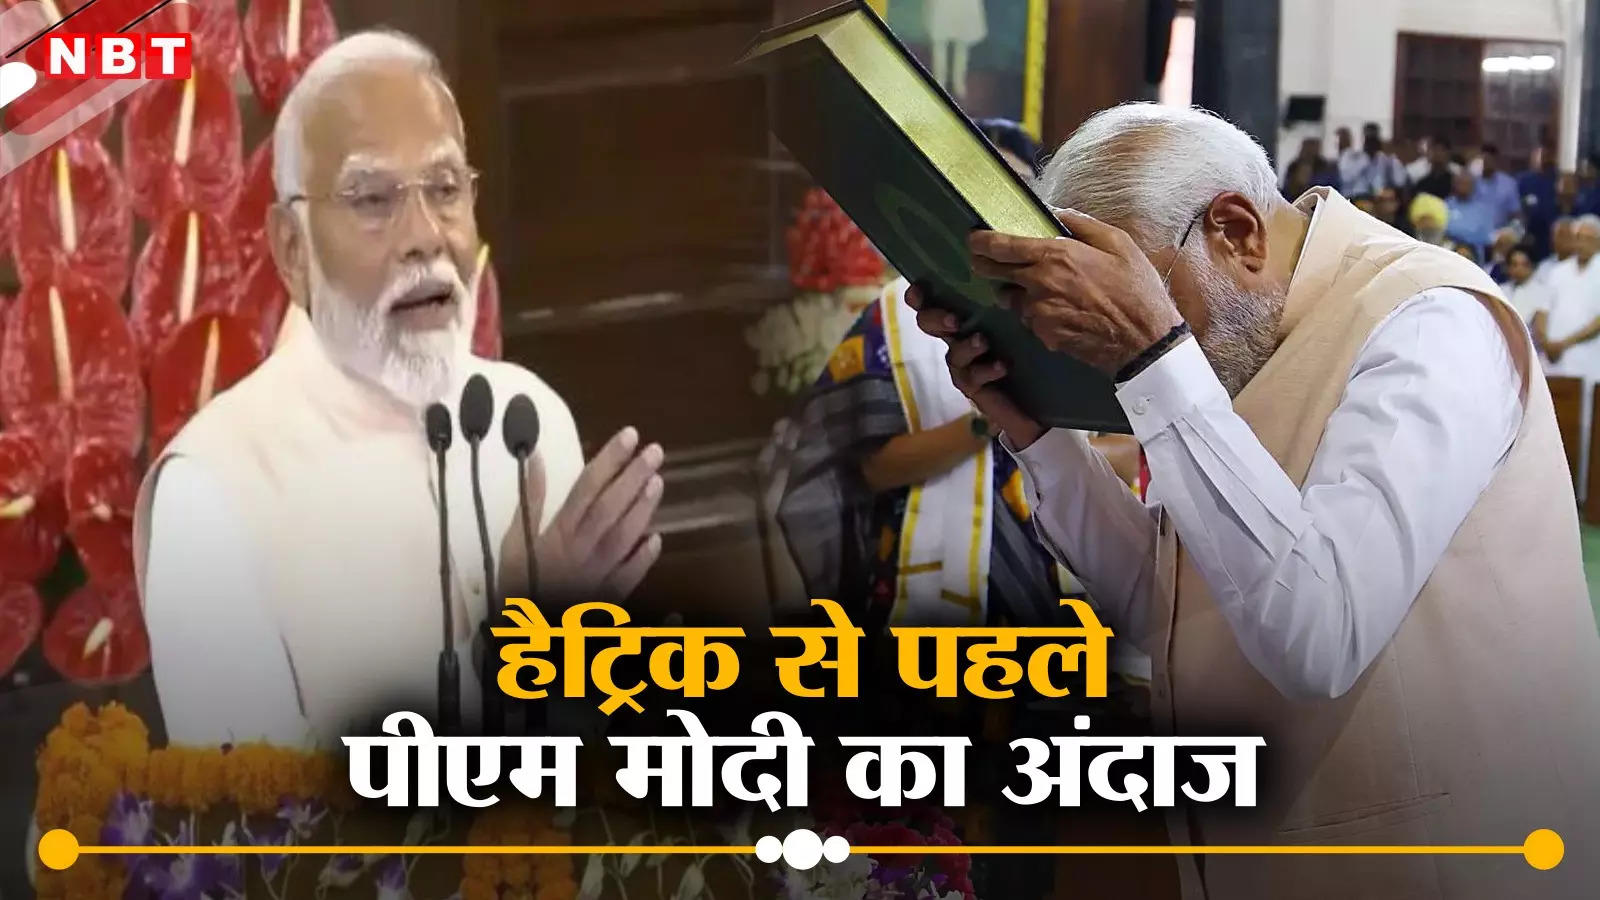 9 powerful dialogues from Modi's speech after being elected the leader of NDA for the third time